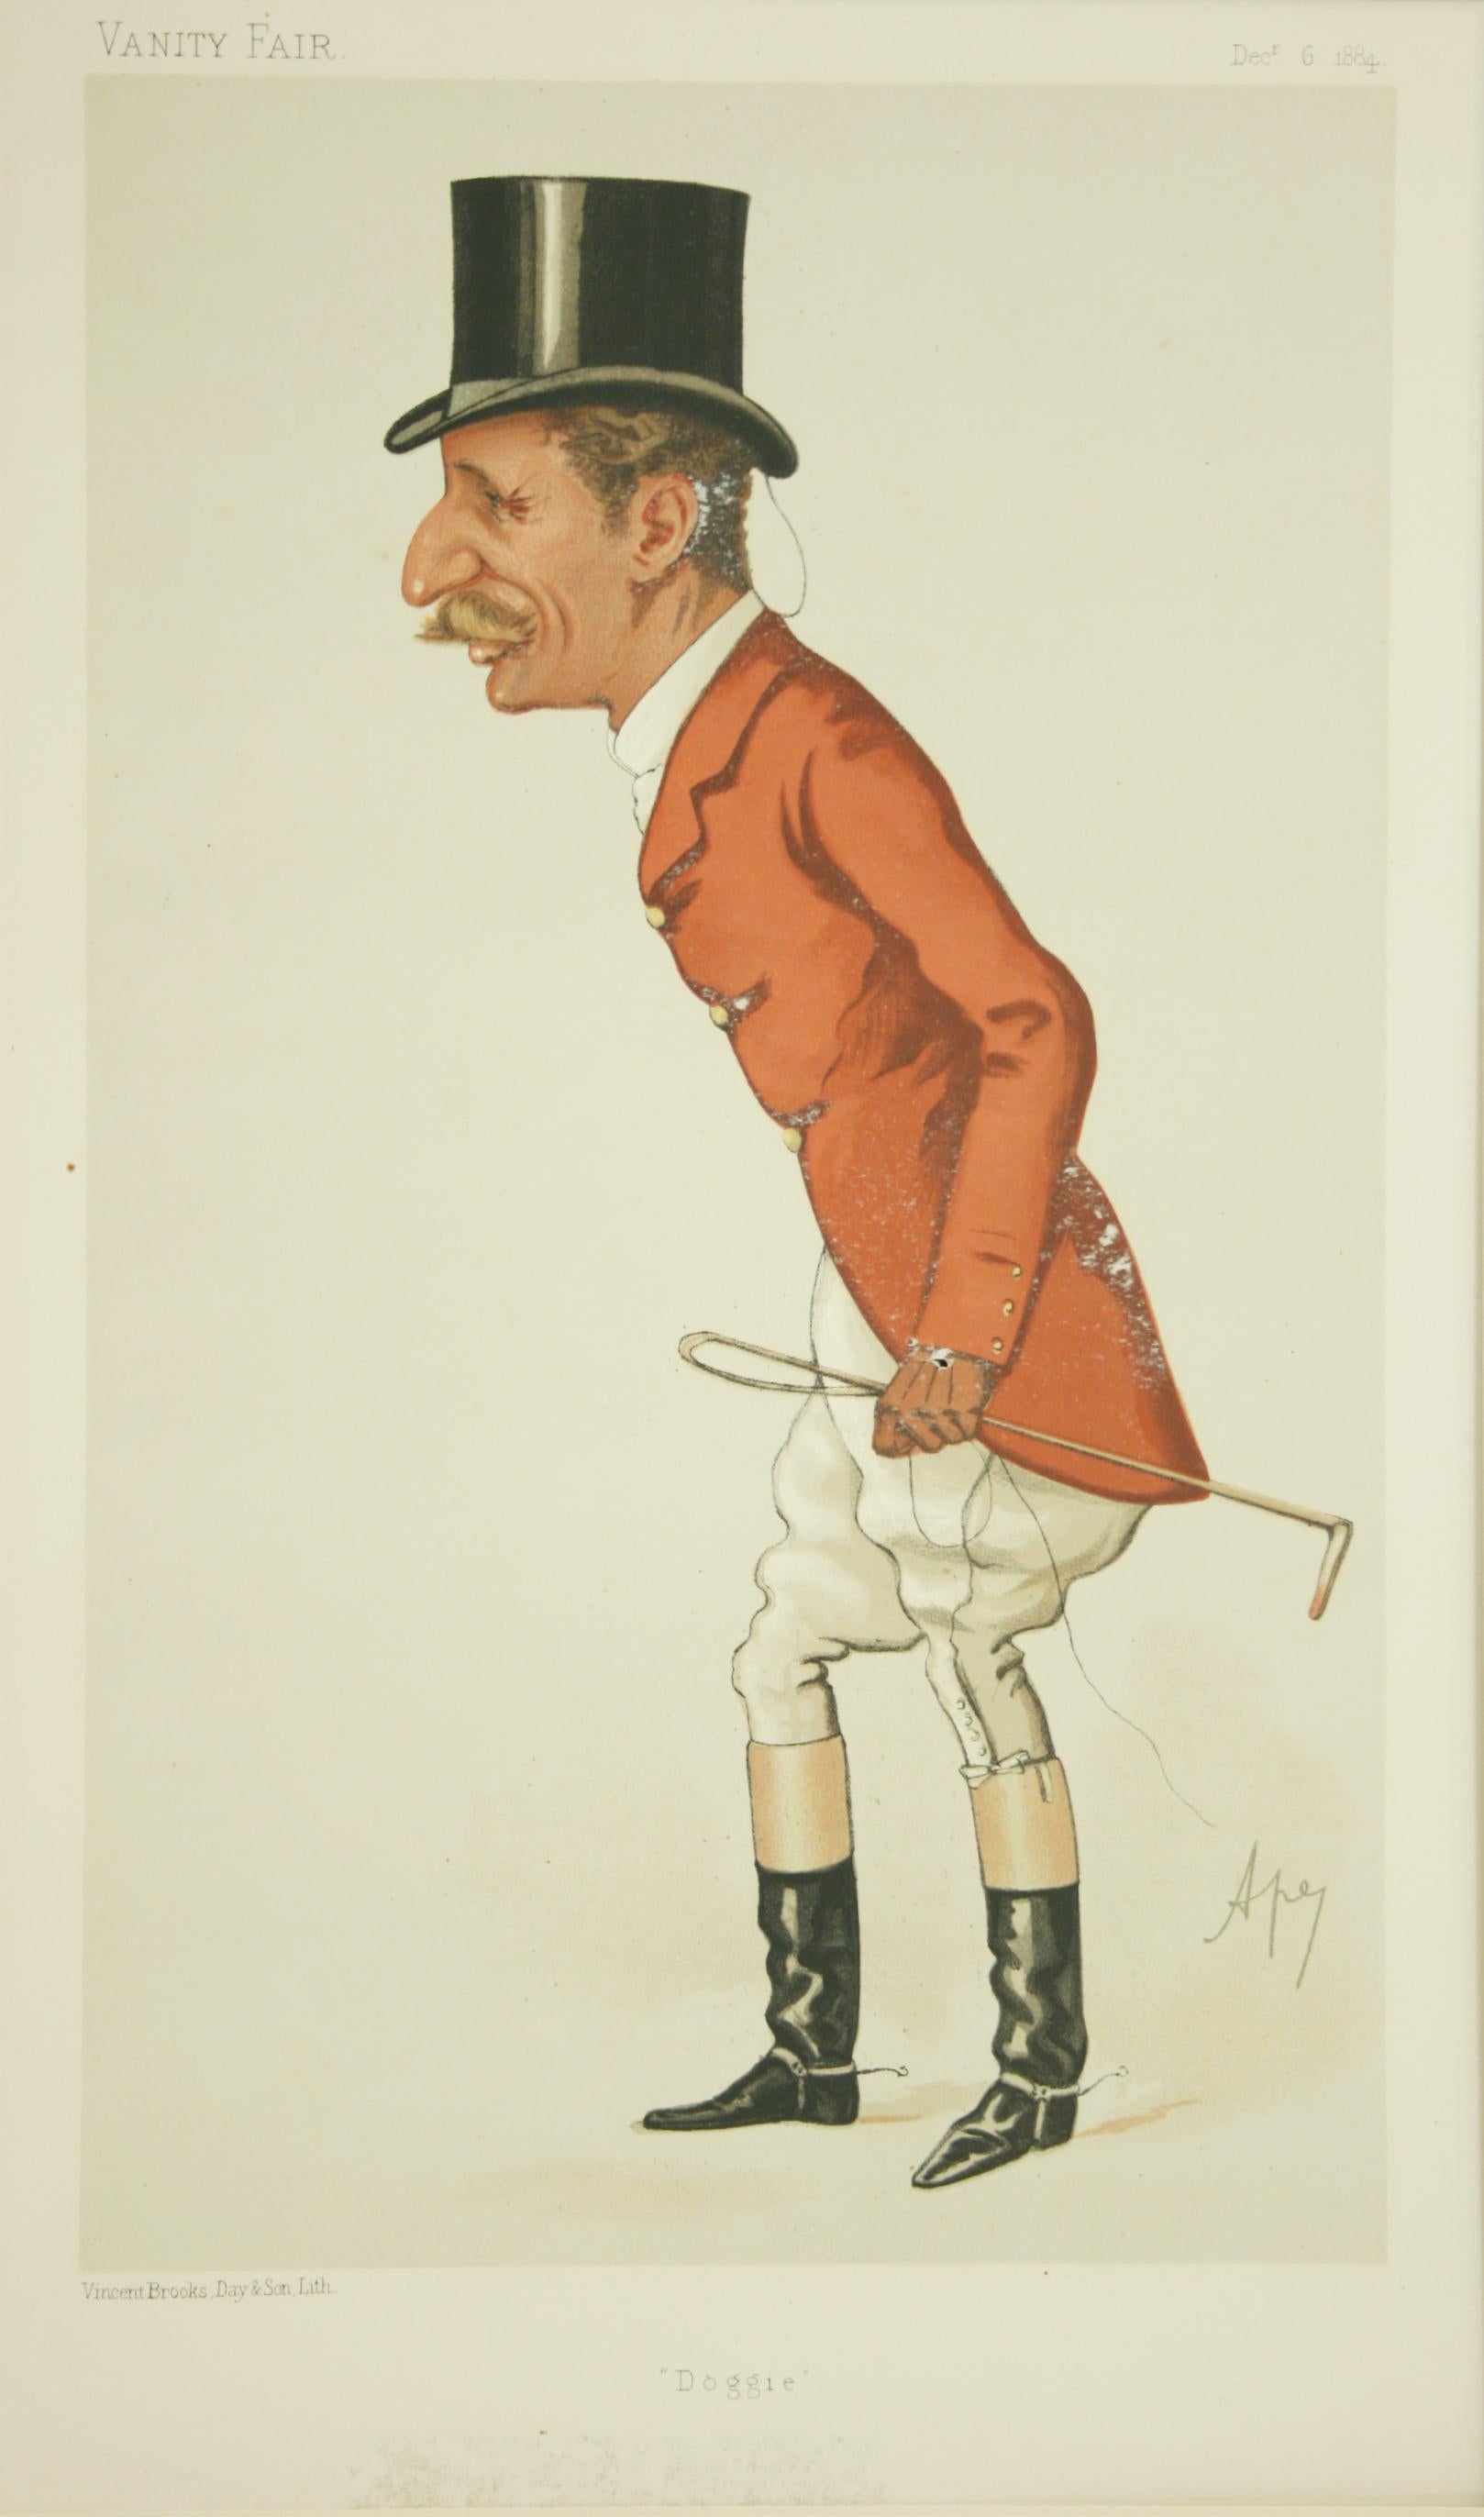 Vanity Fair Fox Hunting print 'Doggie' after Ape.
A chromolithograph print published December 6th, 1884, by Vincent Brooks, Day & Son Ltd. Lith., for Vanity Fair. The picture is titled 'Doggie' and is an original print of Capt. Arthur Smith by Ape,